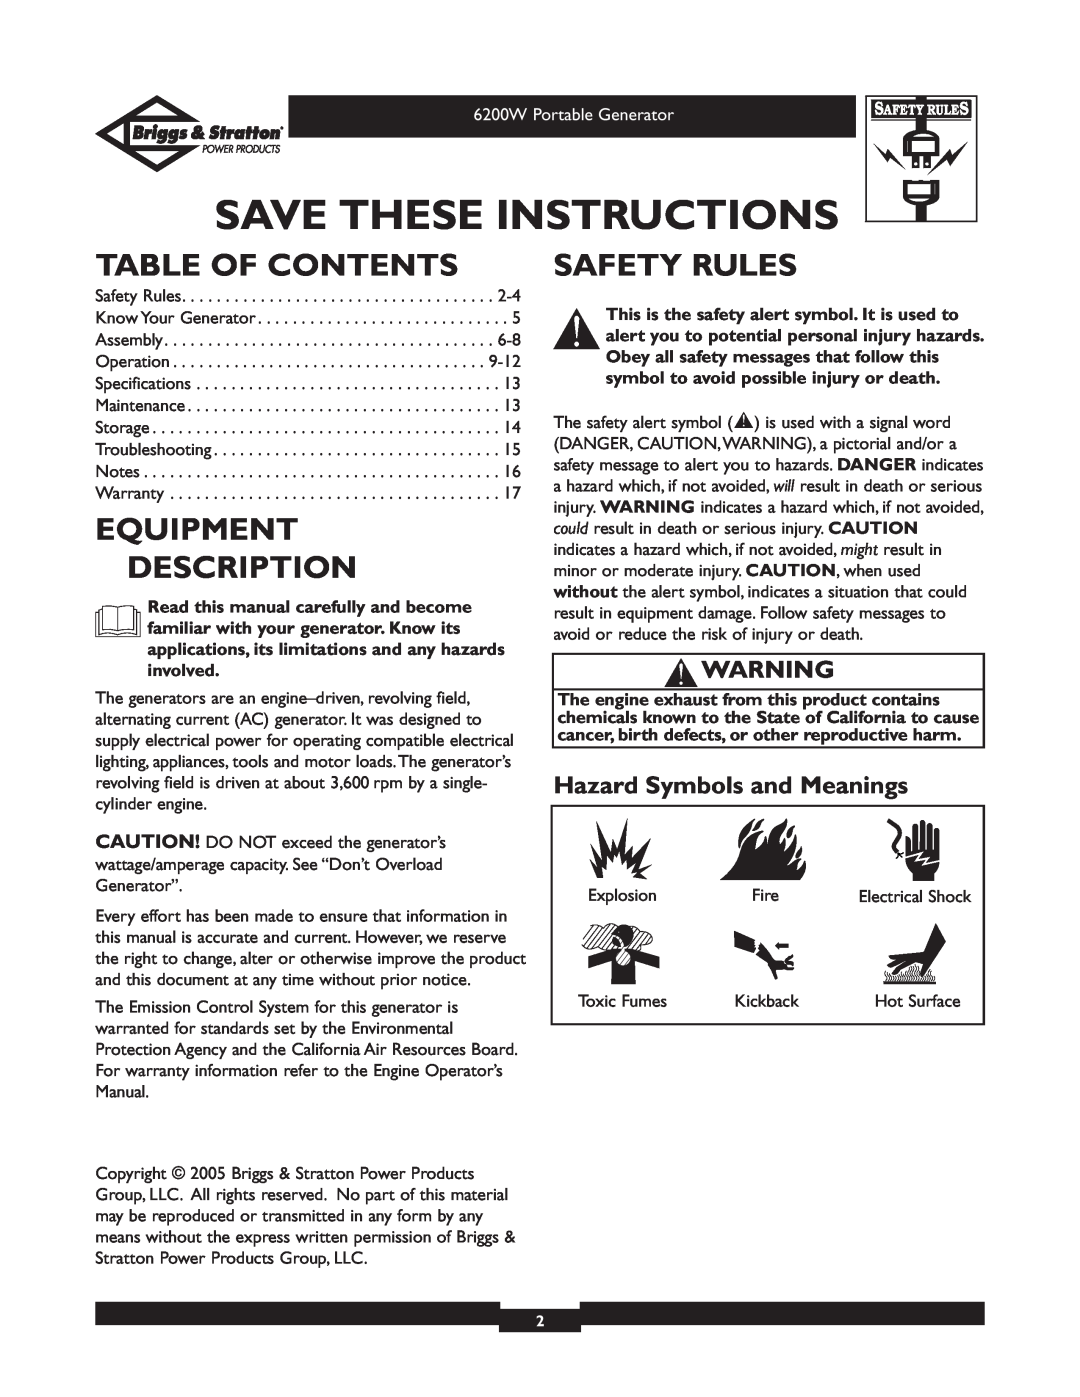 Briggs & Stratton 30211 Table Of Contents, Equipment Description, Safety Rules, Hazard Symbols and Meanings 